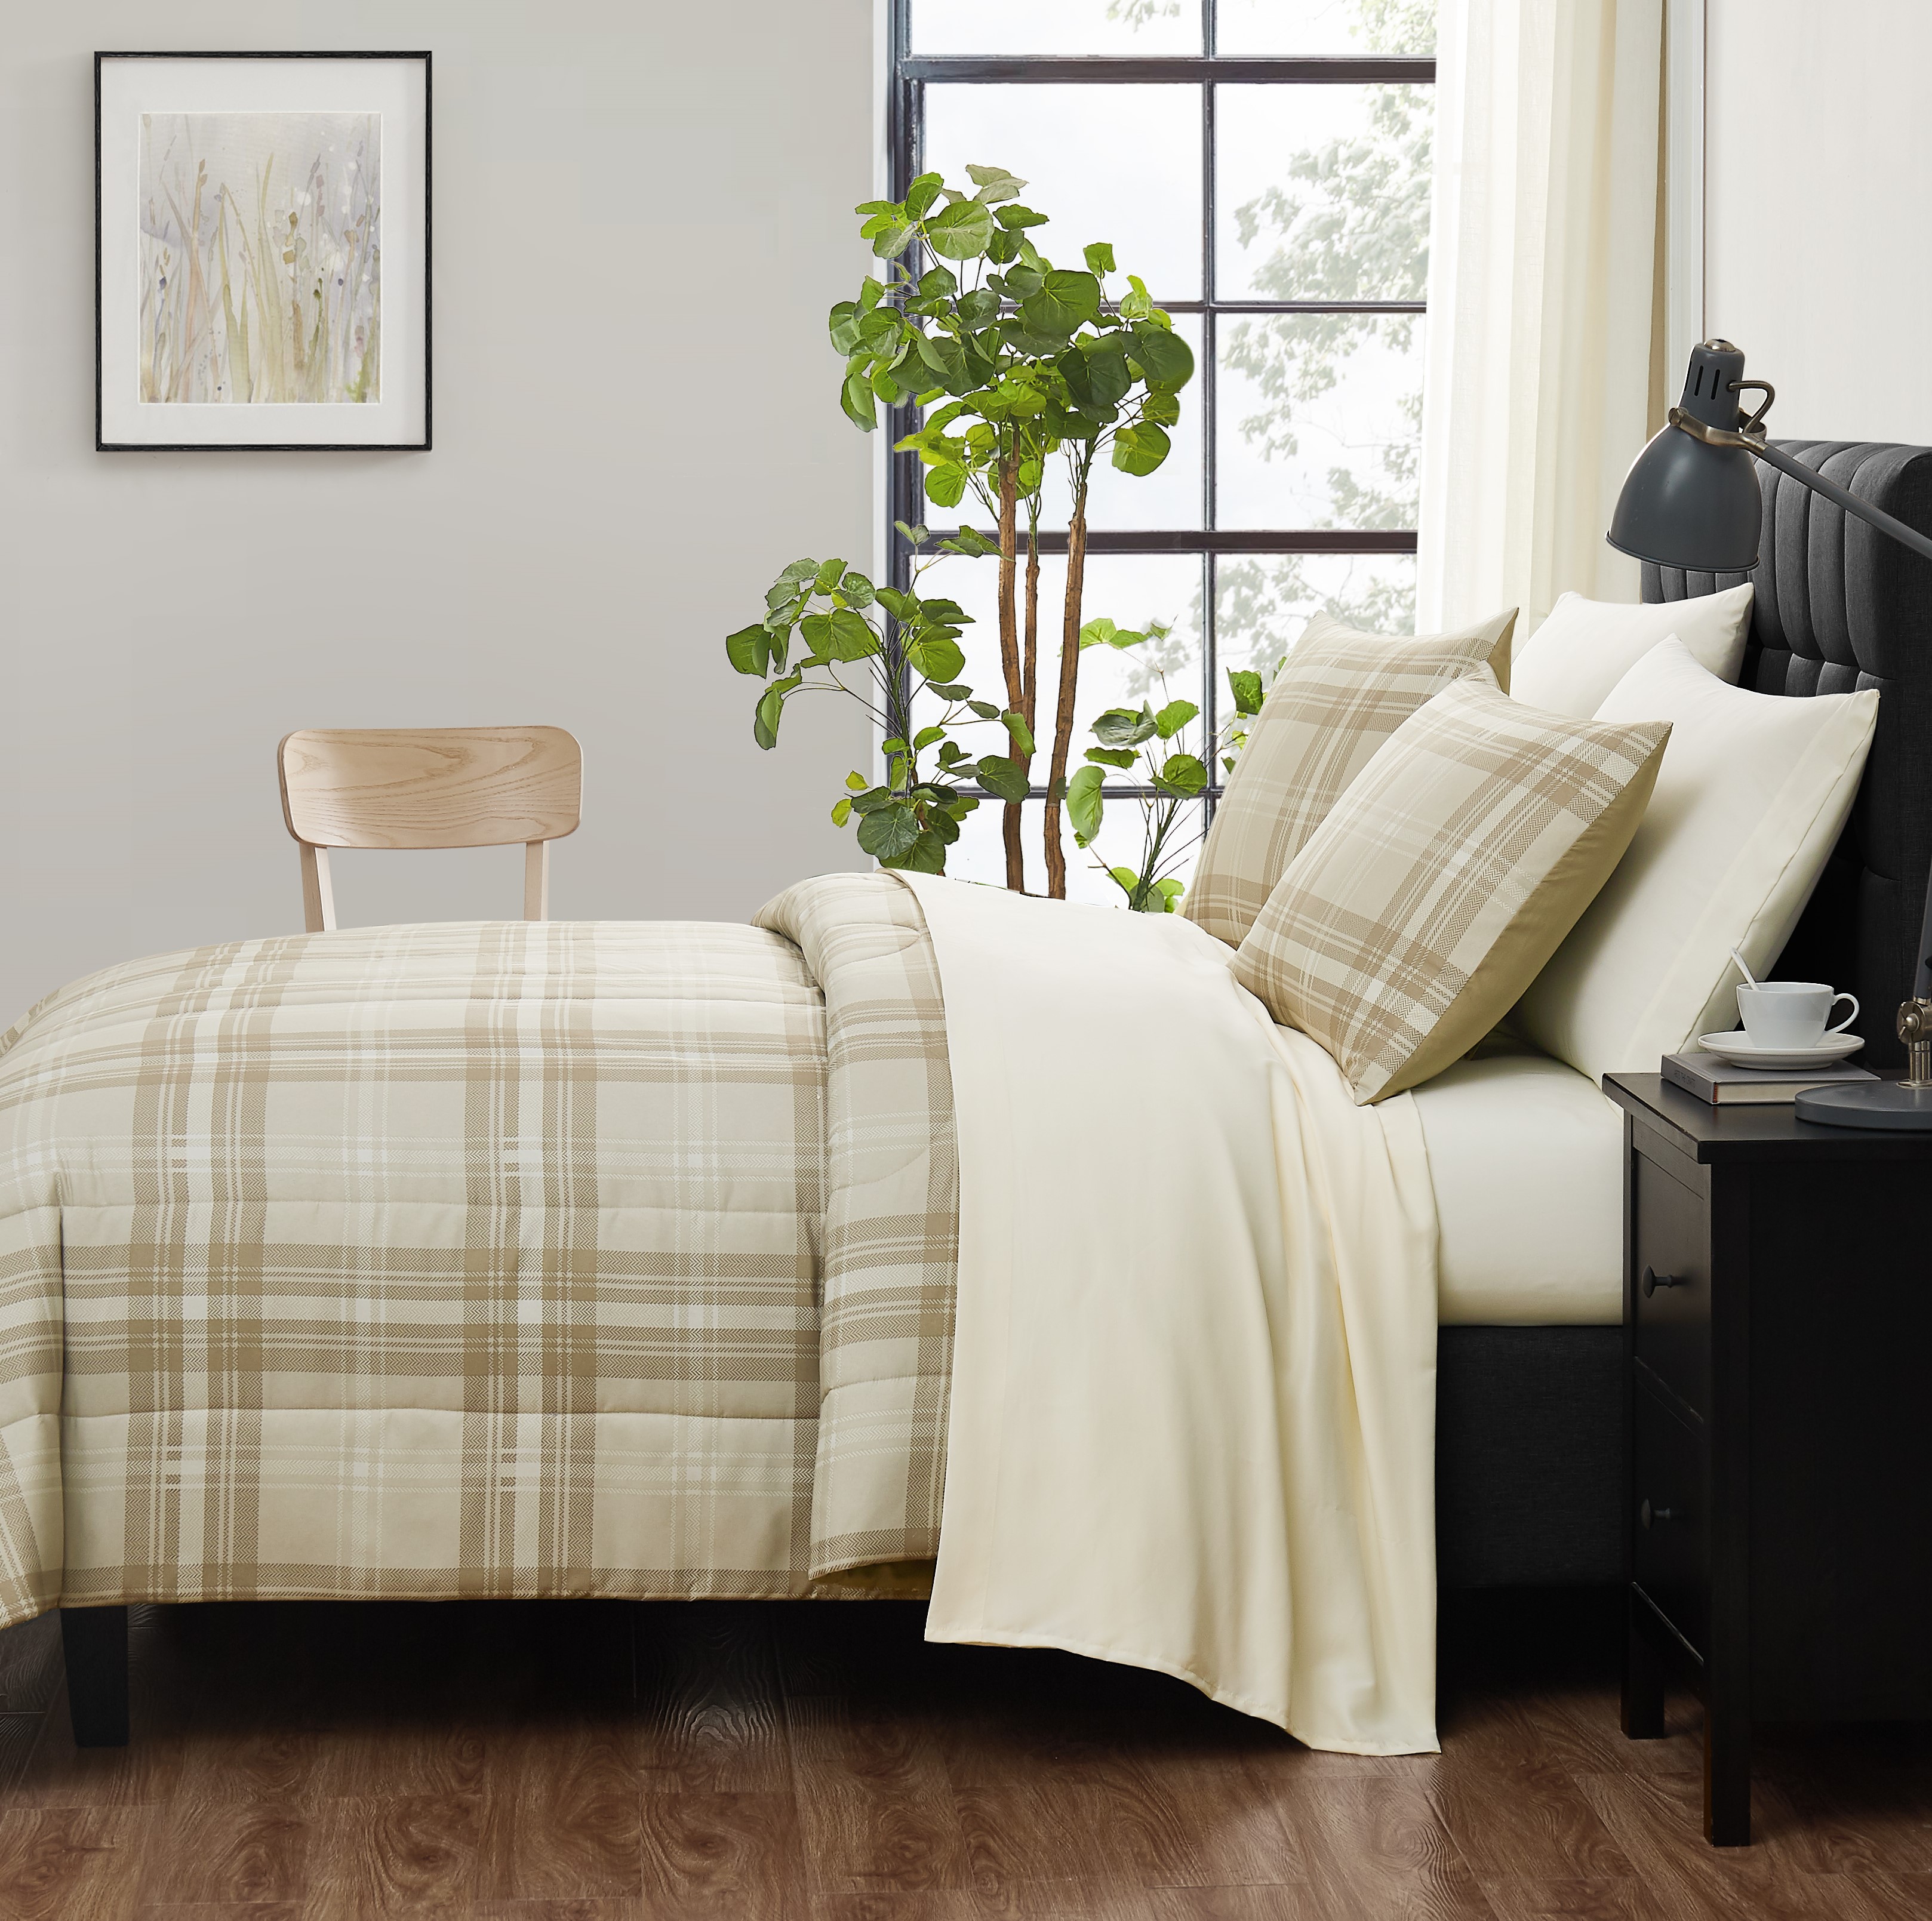 Mainstays Beige Plaid Reversible 7-Piece Bed in a Bag Comforter Set with Sheets, King - image 4 of 7